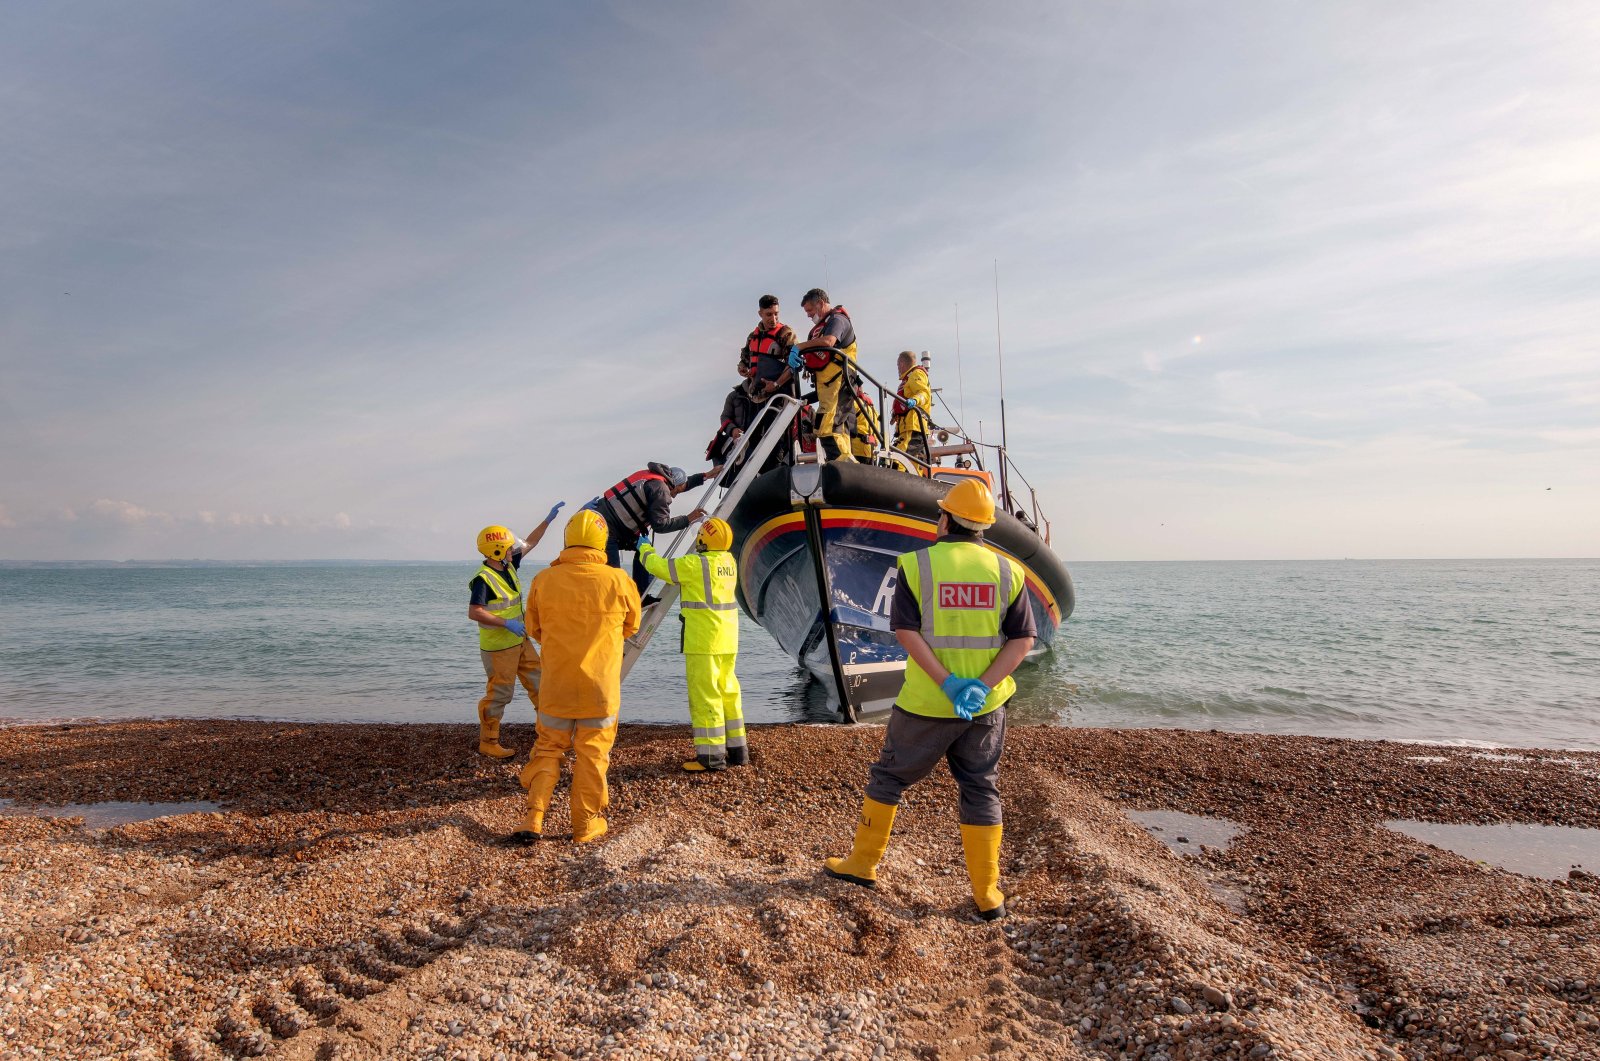 Royal National Lifeboat Institution shore crew help migrants disembark after being rescued in the English Channel, at Dungeness, Britain, Sept. 22, 2022. (EPA Photo)